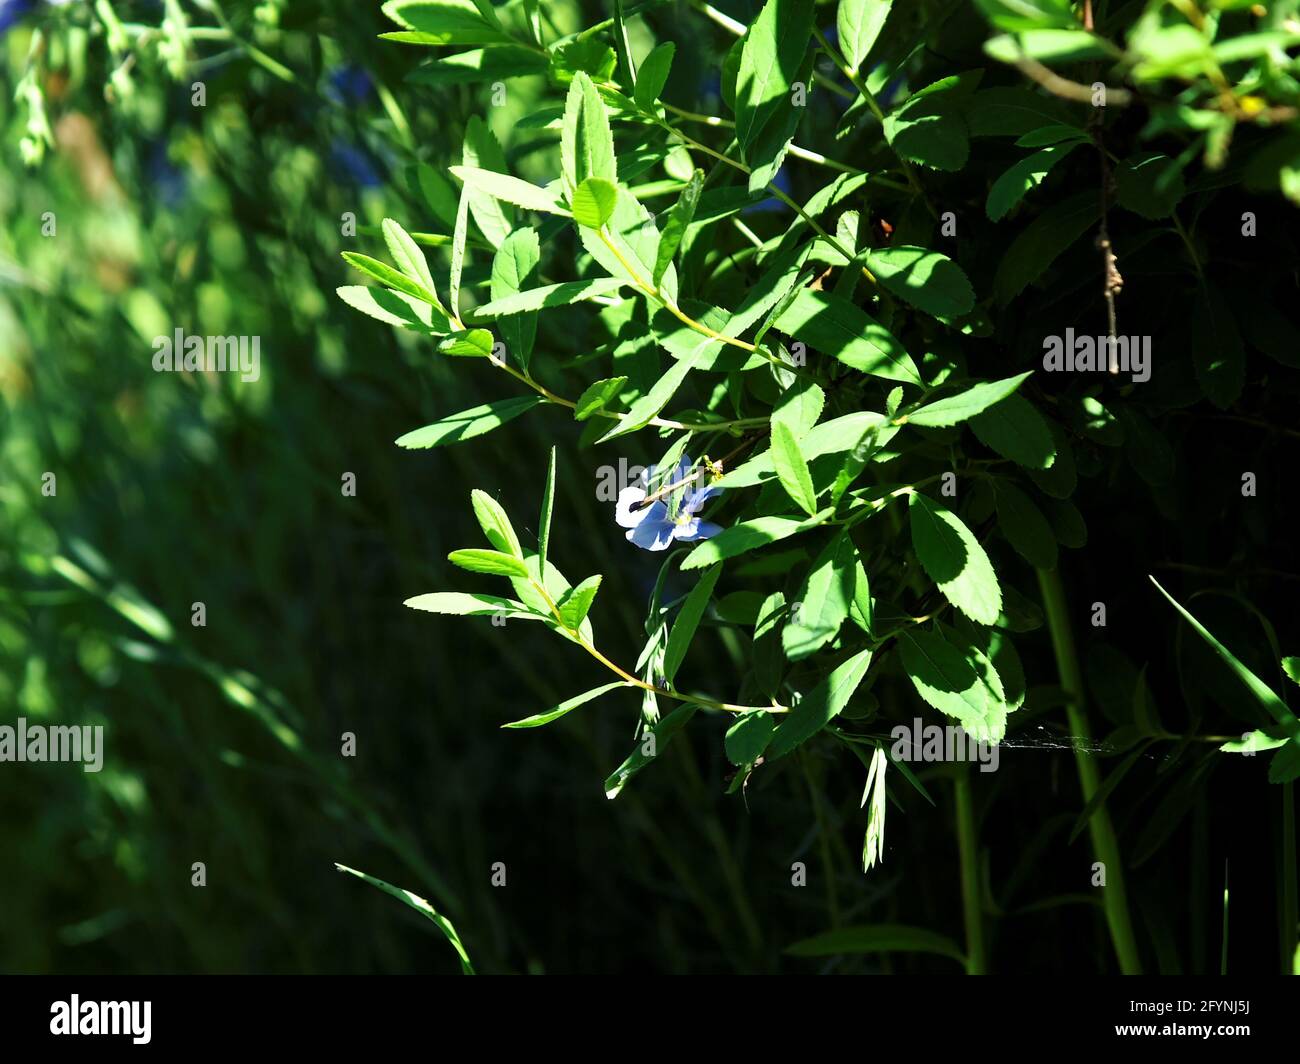 small blue flowers on bushes, in summer Stock Photo